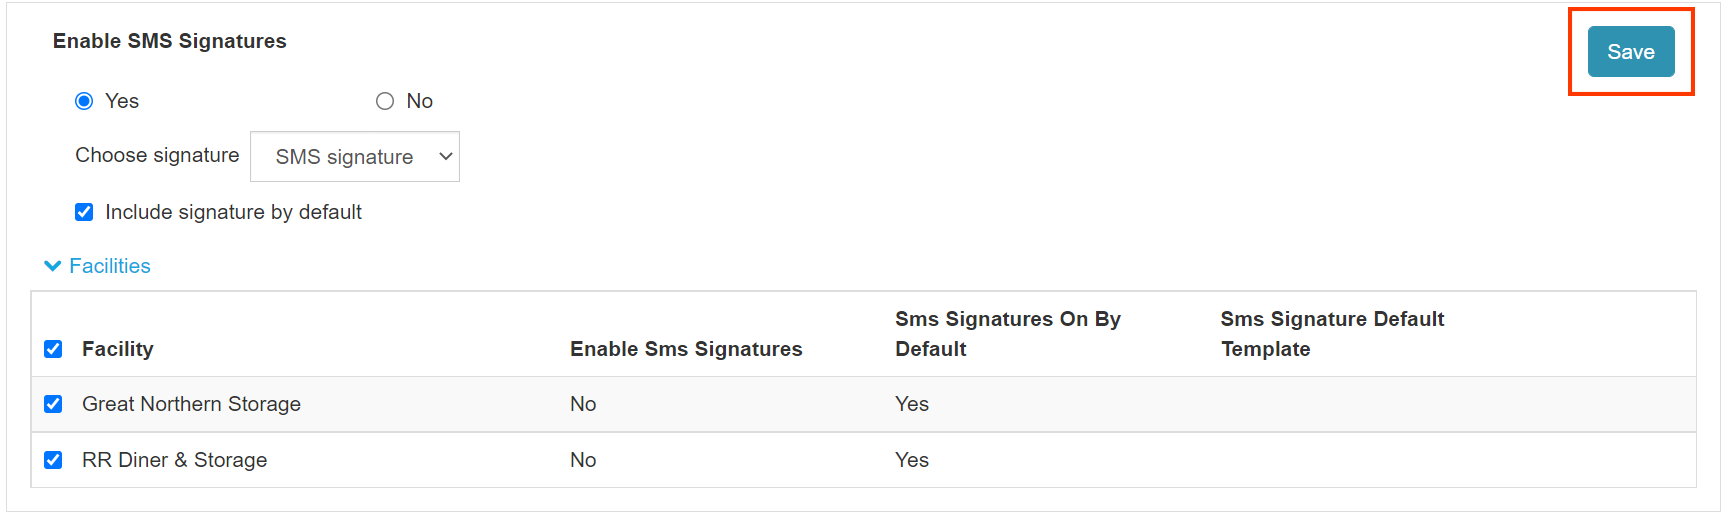 sms_signature_save.png